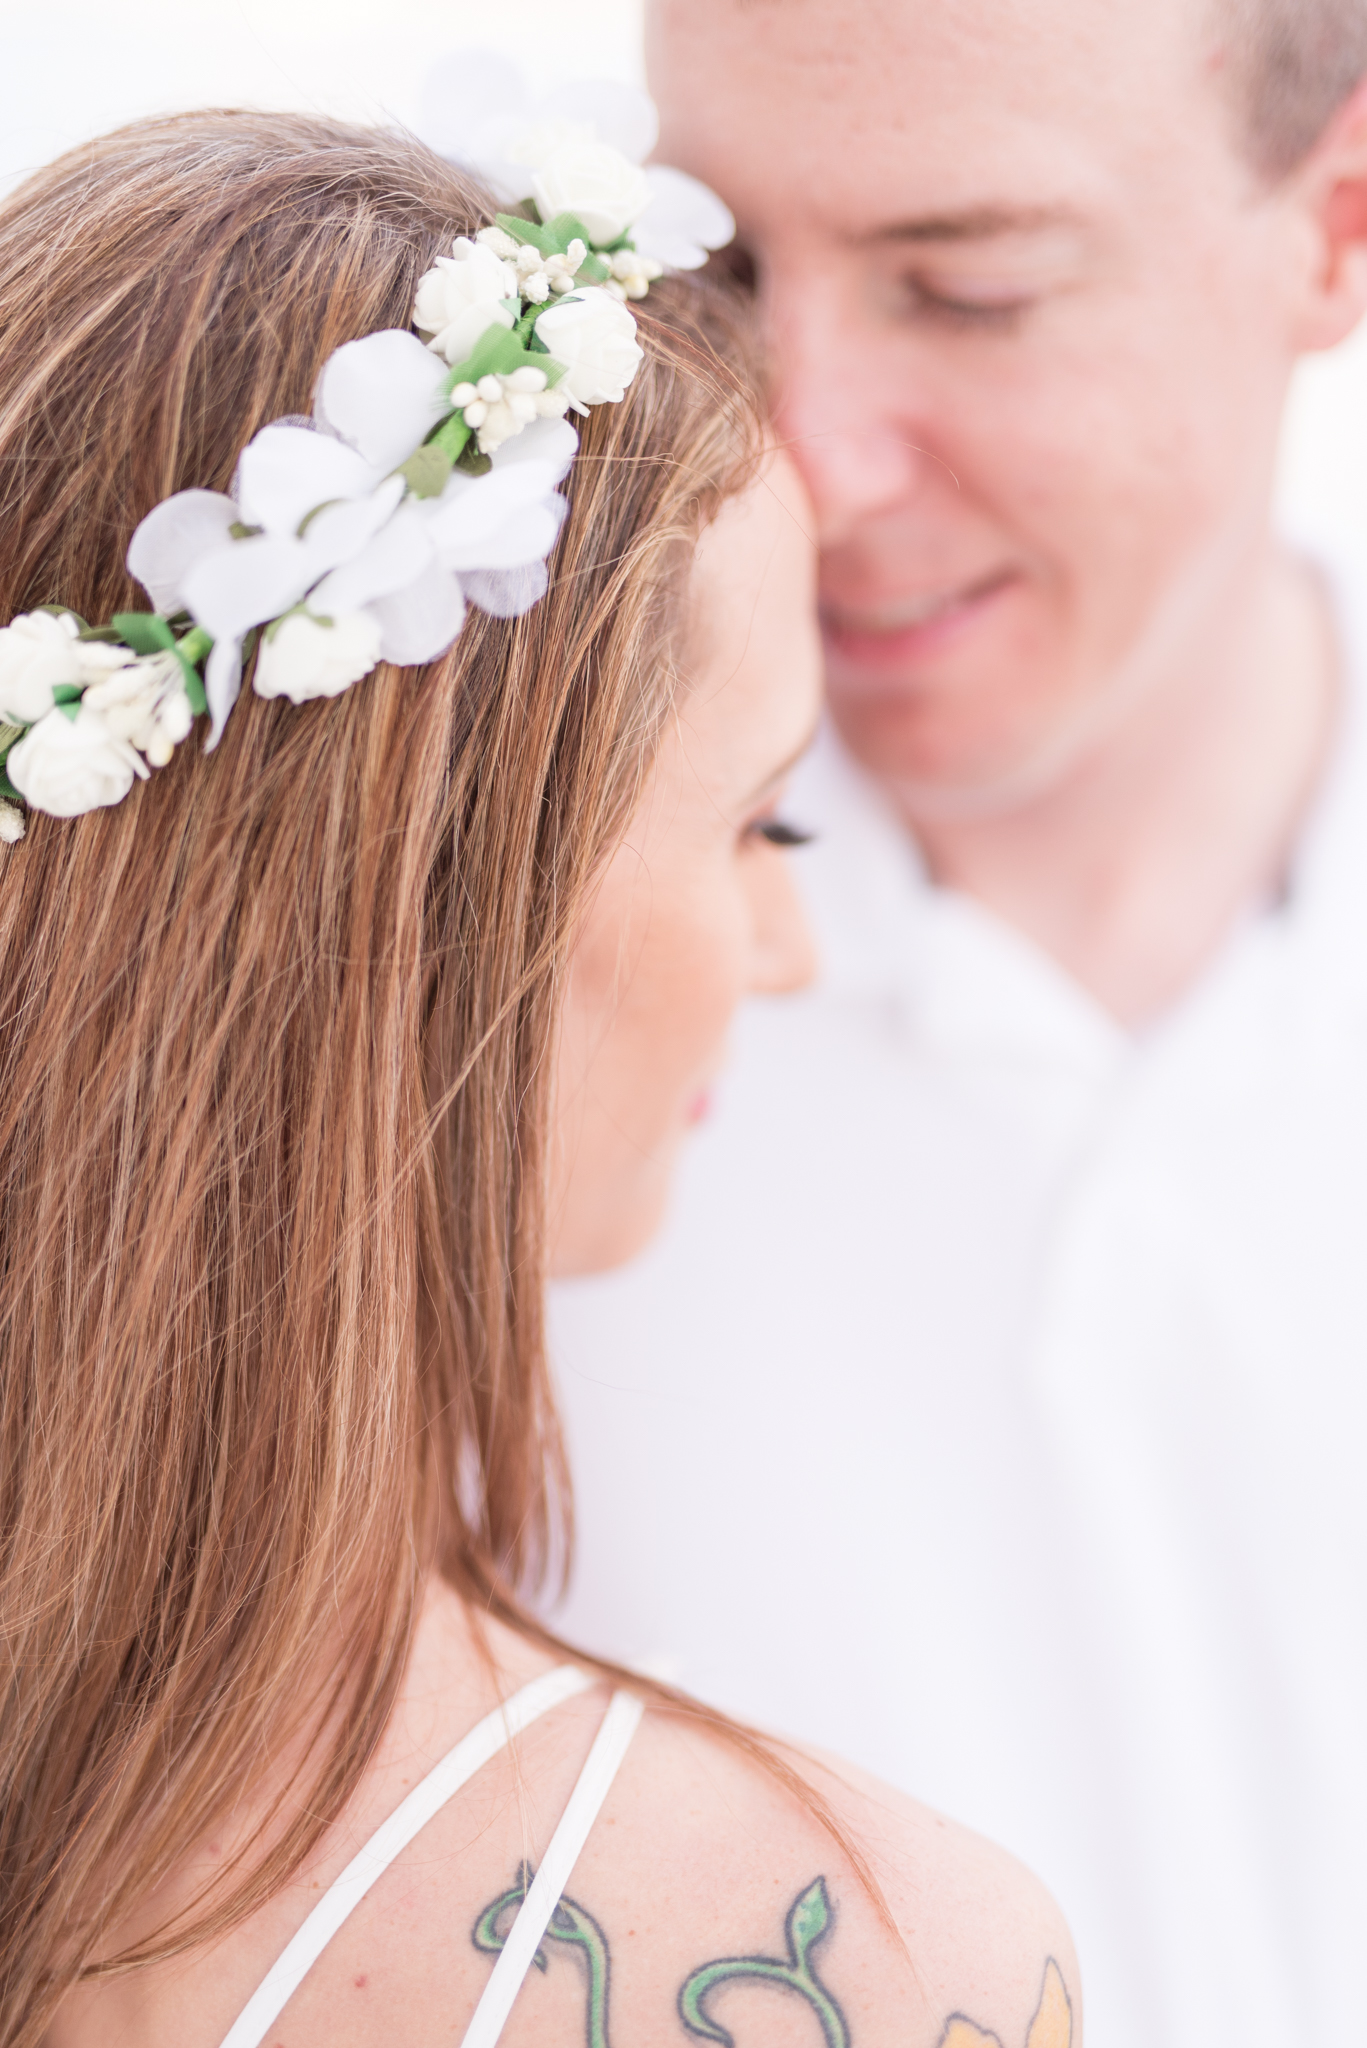 Woman wears flower crown to St. Petersburg engagement session.